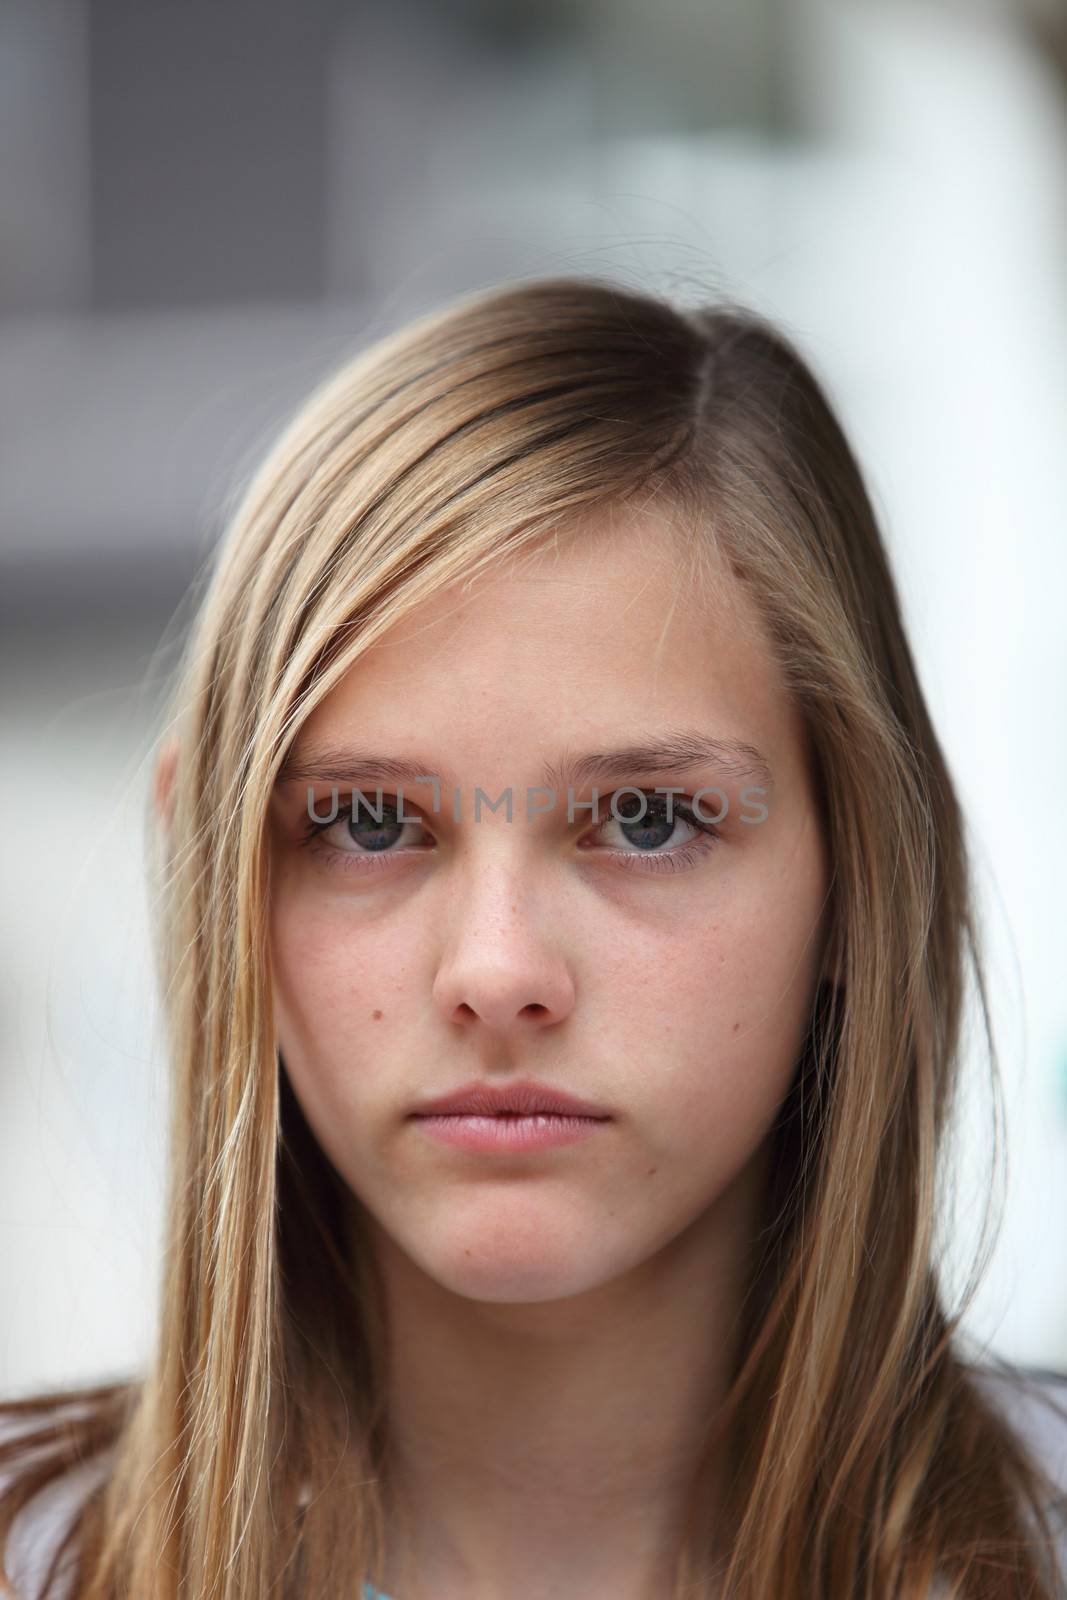 Young teenage girl with a serious expression and long blond hair looking directly at the camera